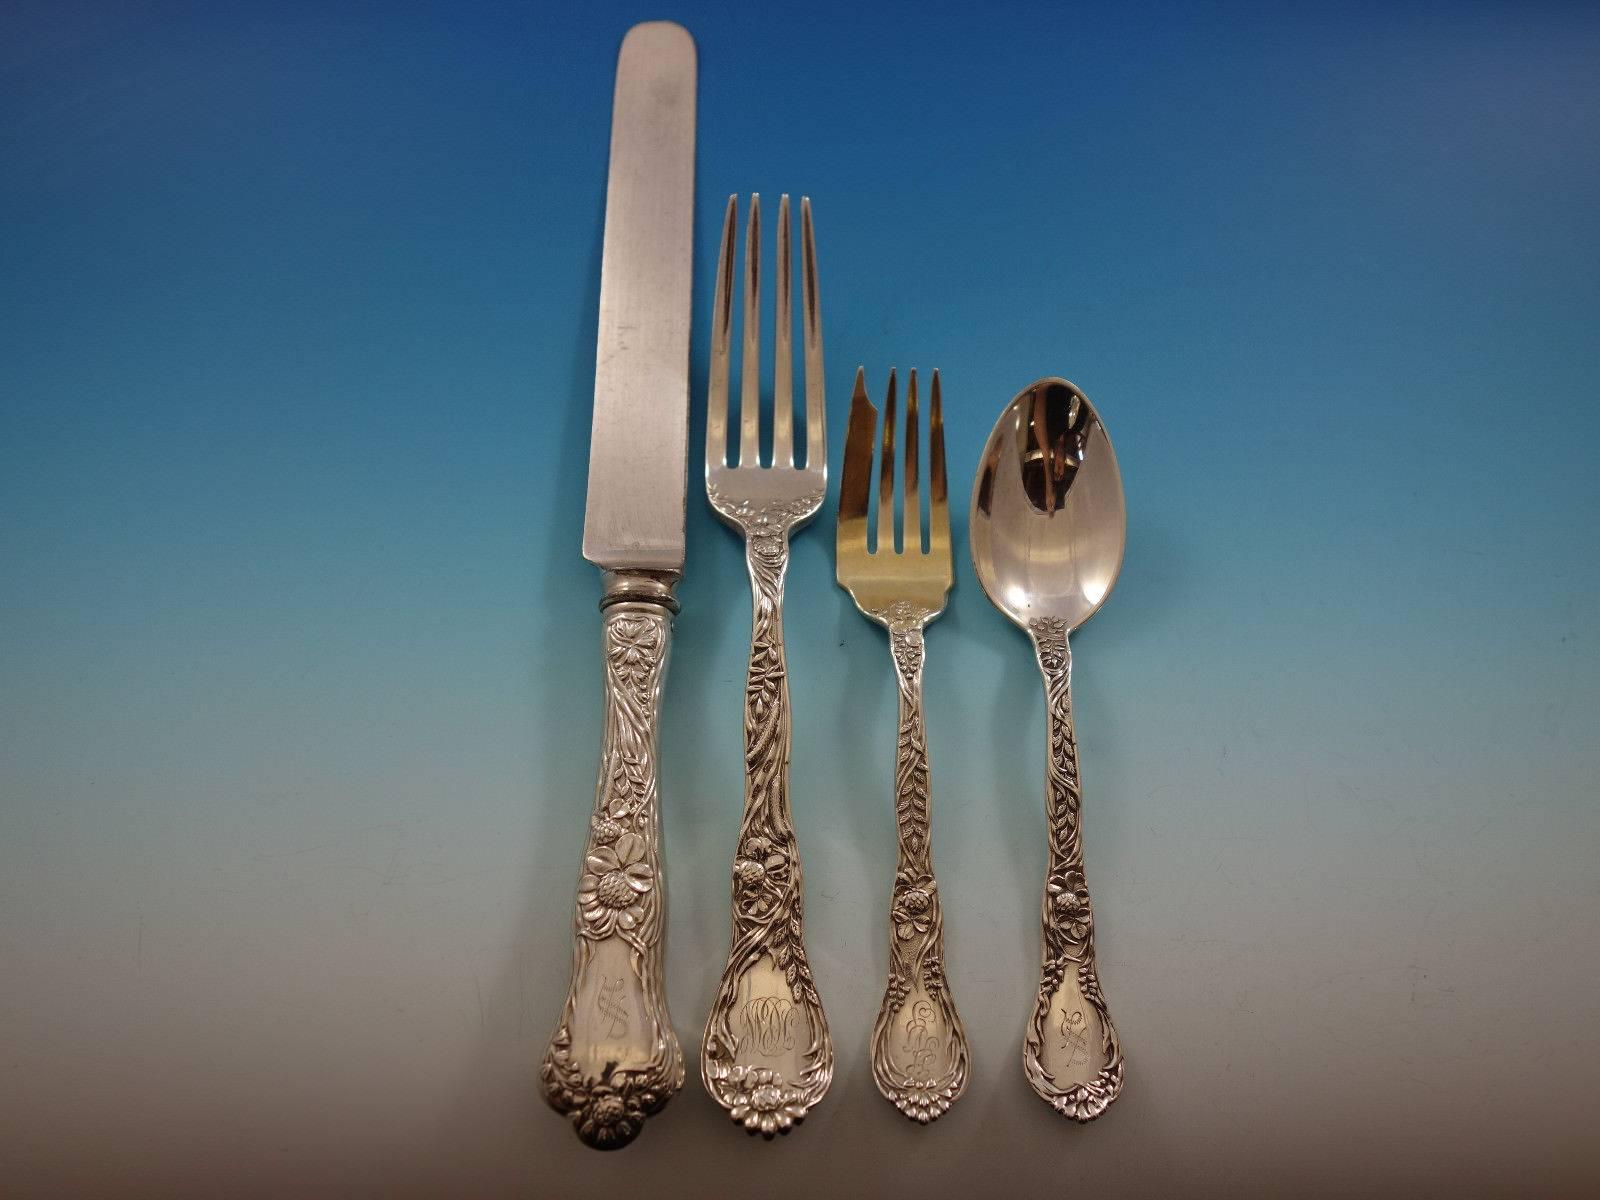 Exceptional Meadow by Gorham Sterling silver Flatware set - 176 Pieces including many fabulous serving pieces. This set includes:

12 Large Banquet Knives, 10 1/2